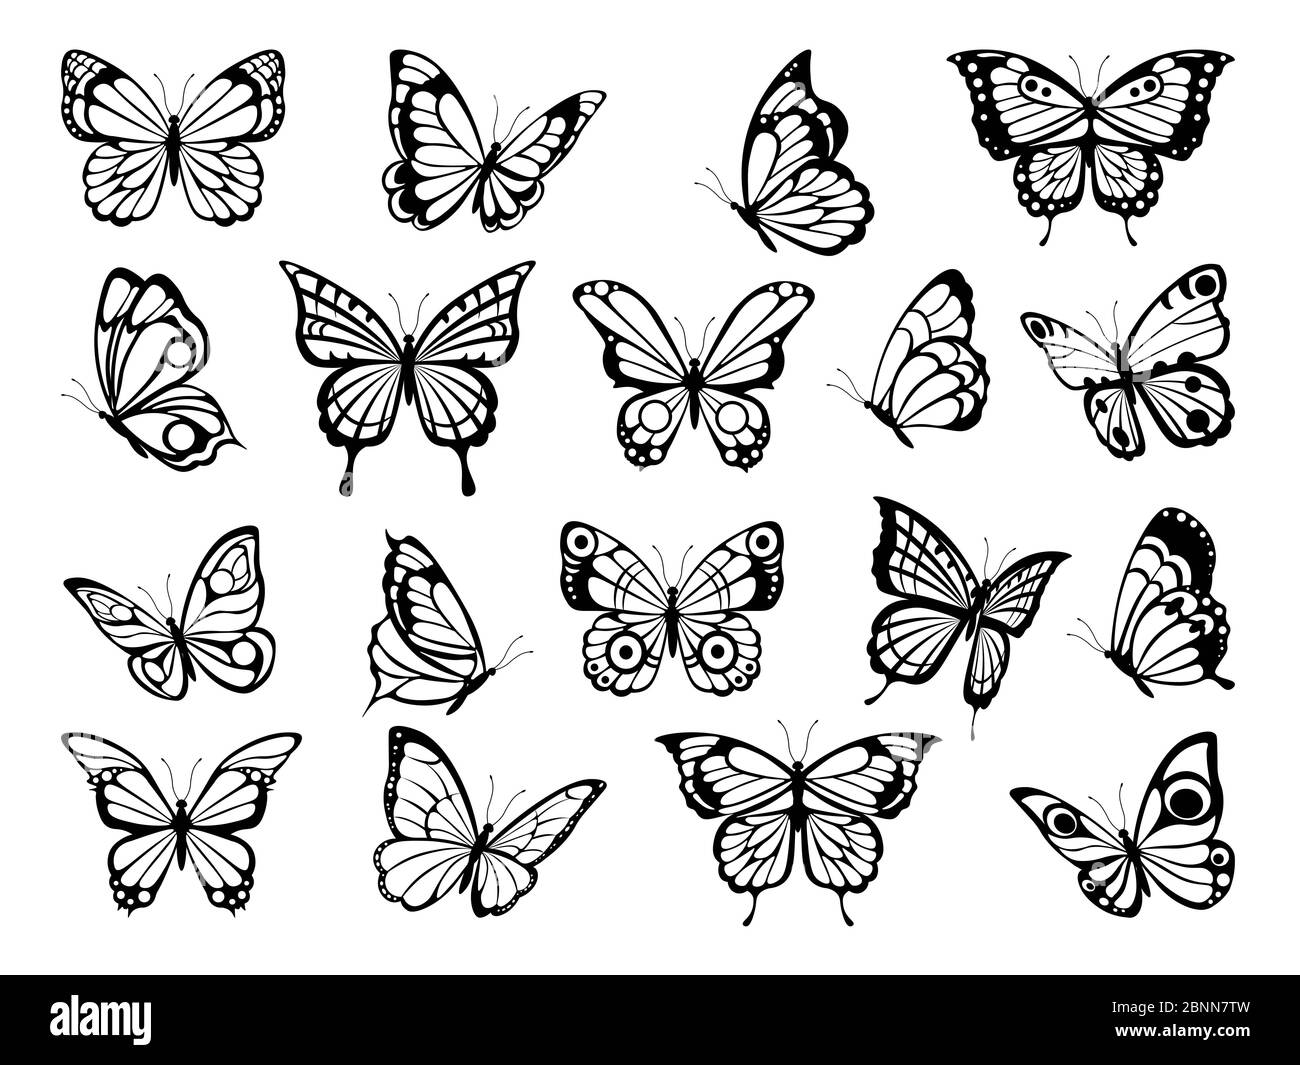 Silhouettes of butterflies. Black pictures of funny butterflies Stock Vector